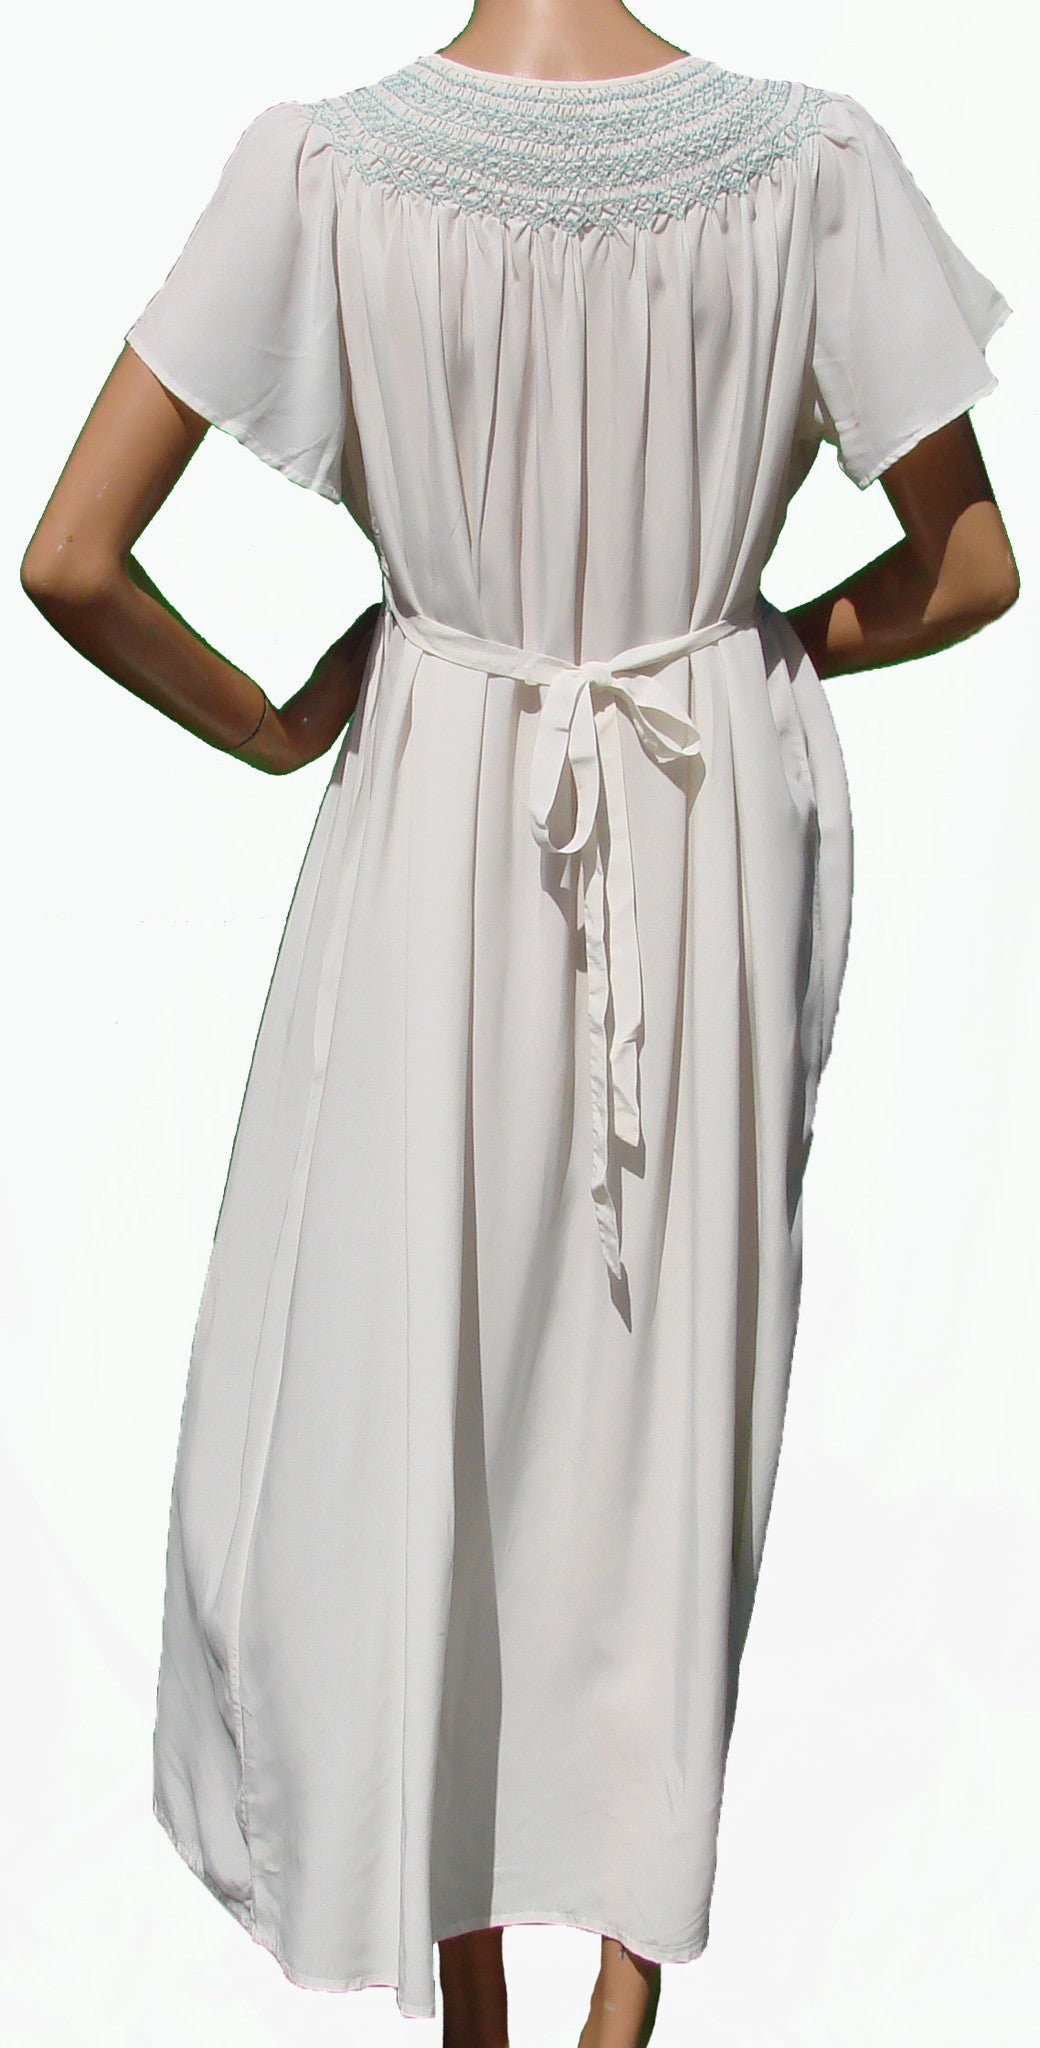 1940s Nightgown Grecian Goddess Nightie In White Rayon With Smocking 